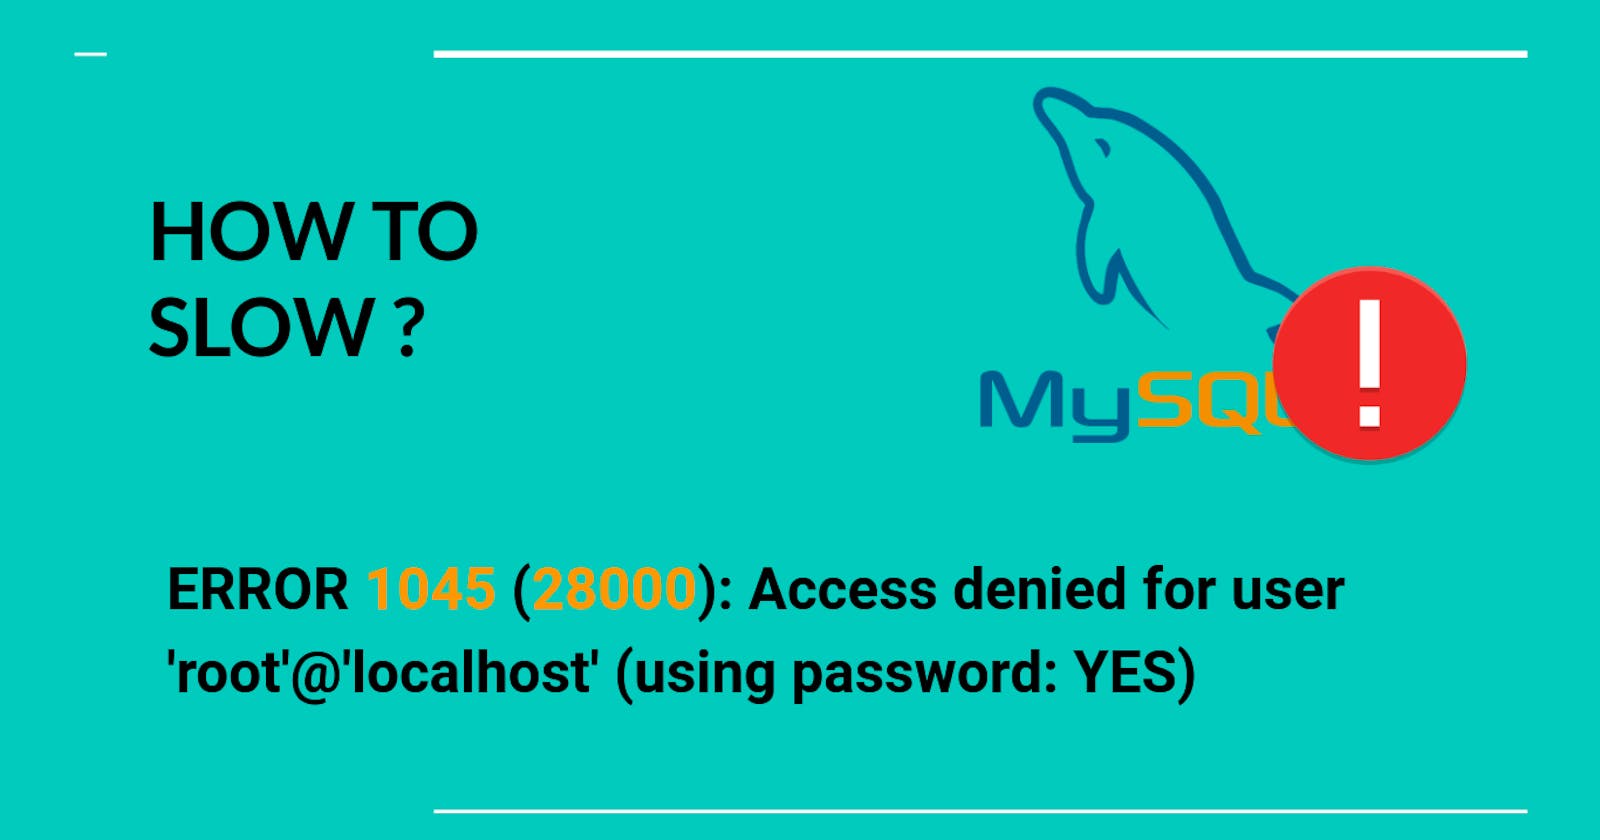 HOW TO SLOW "(ERROR 1045 (28000): Access denied for user 'root'@'localhost' (using password: YES)"